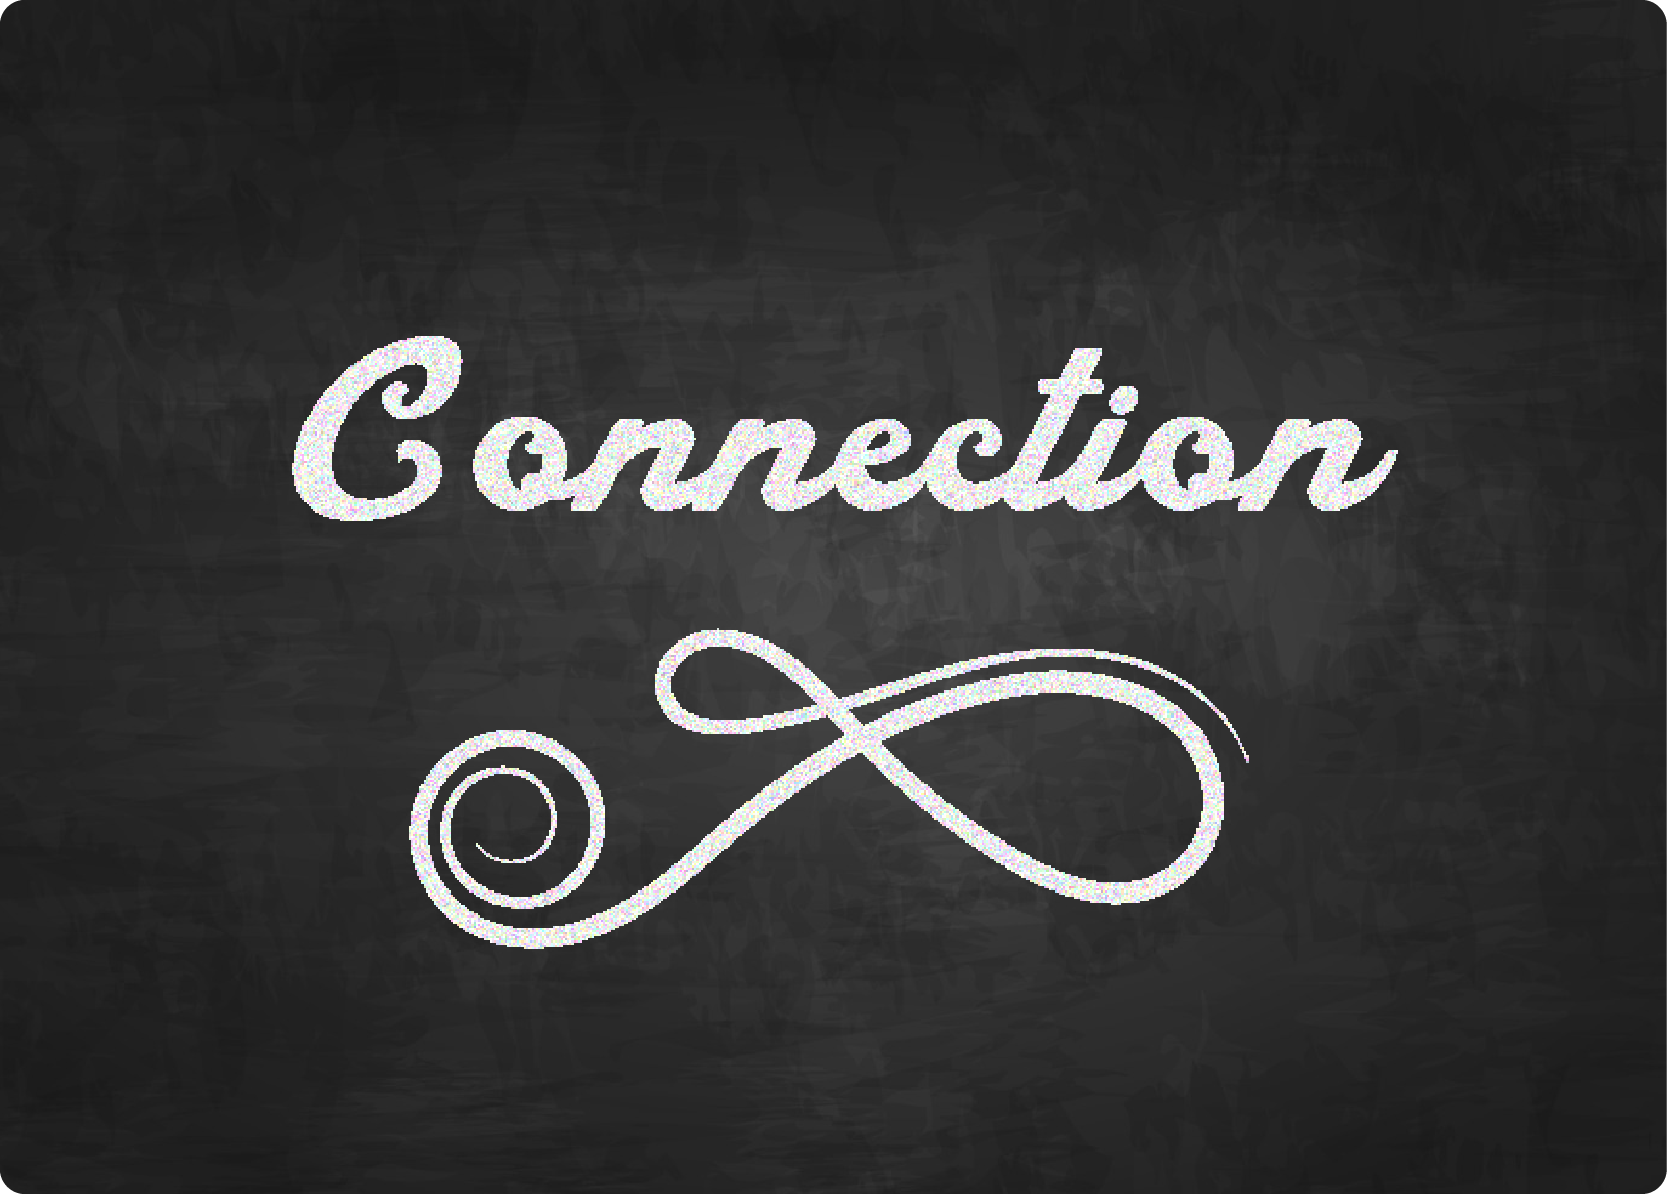 Connection